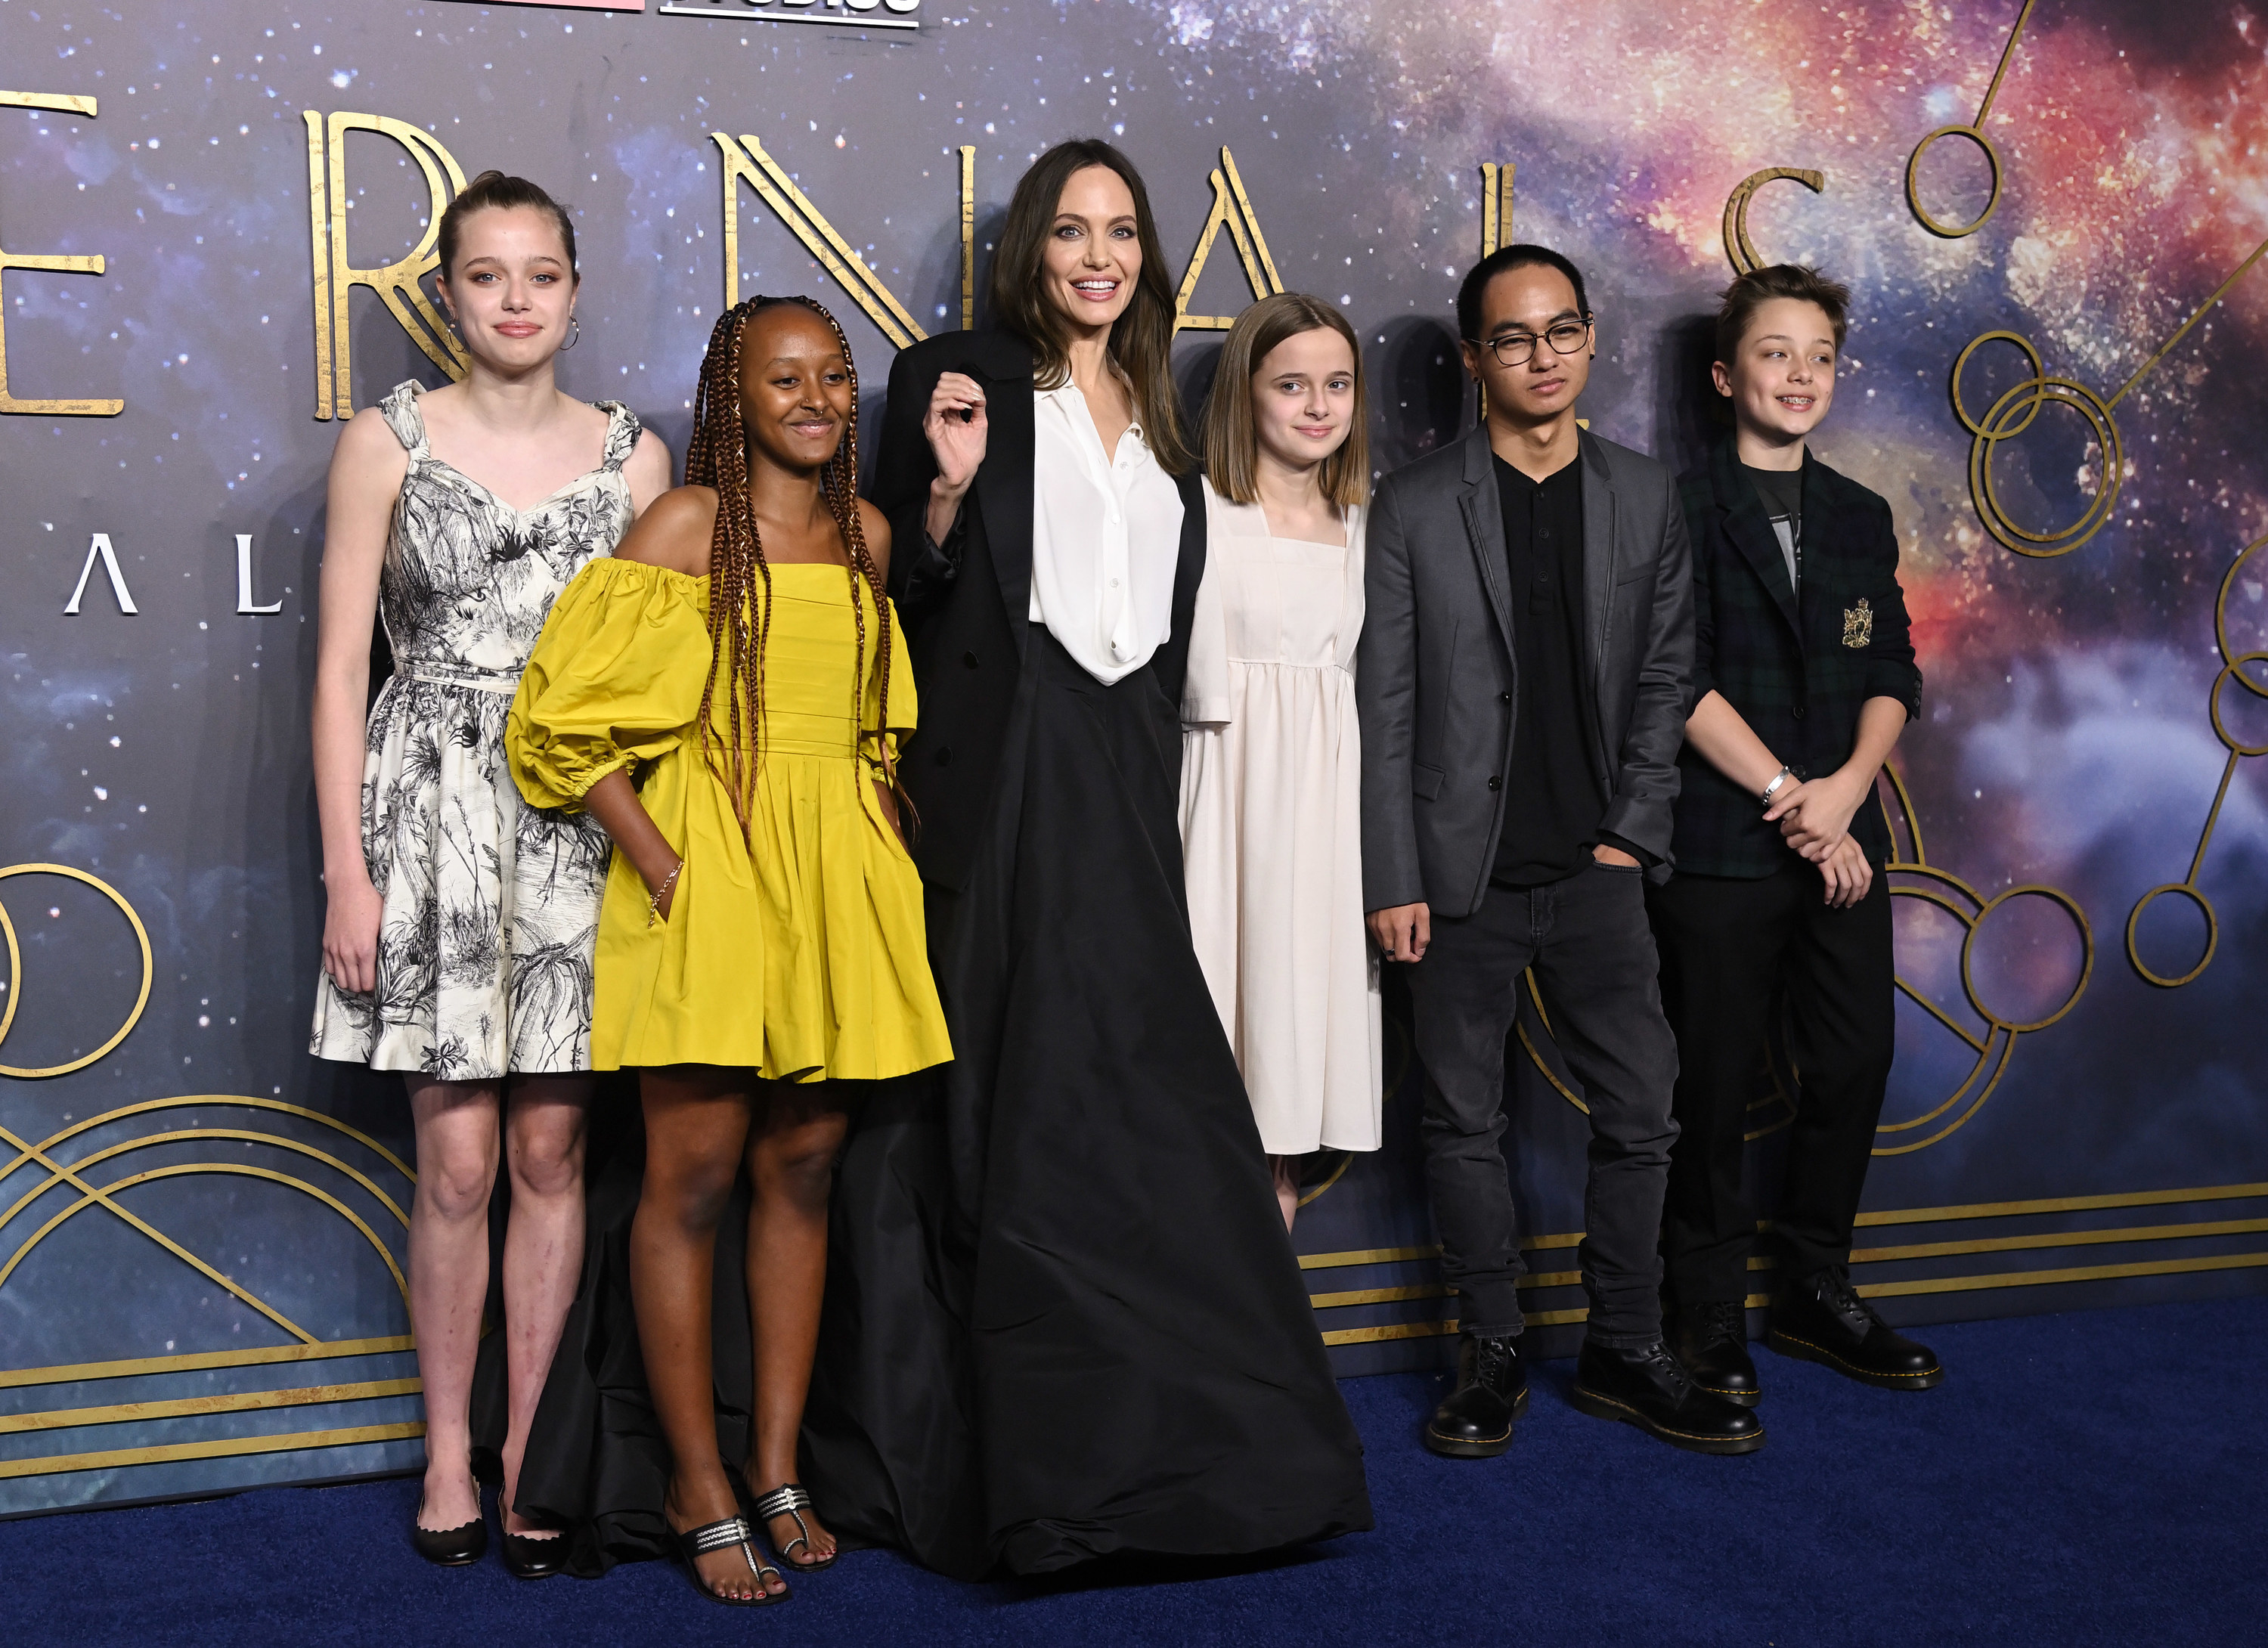 Angelina poses with her children on a red carpet